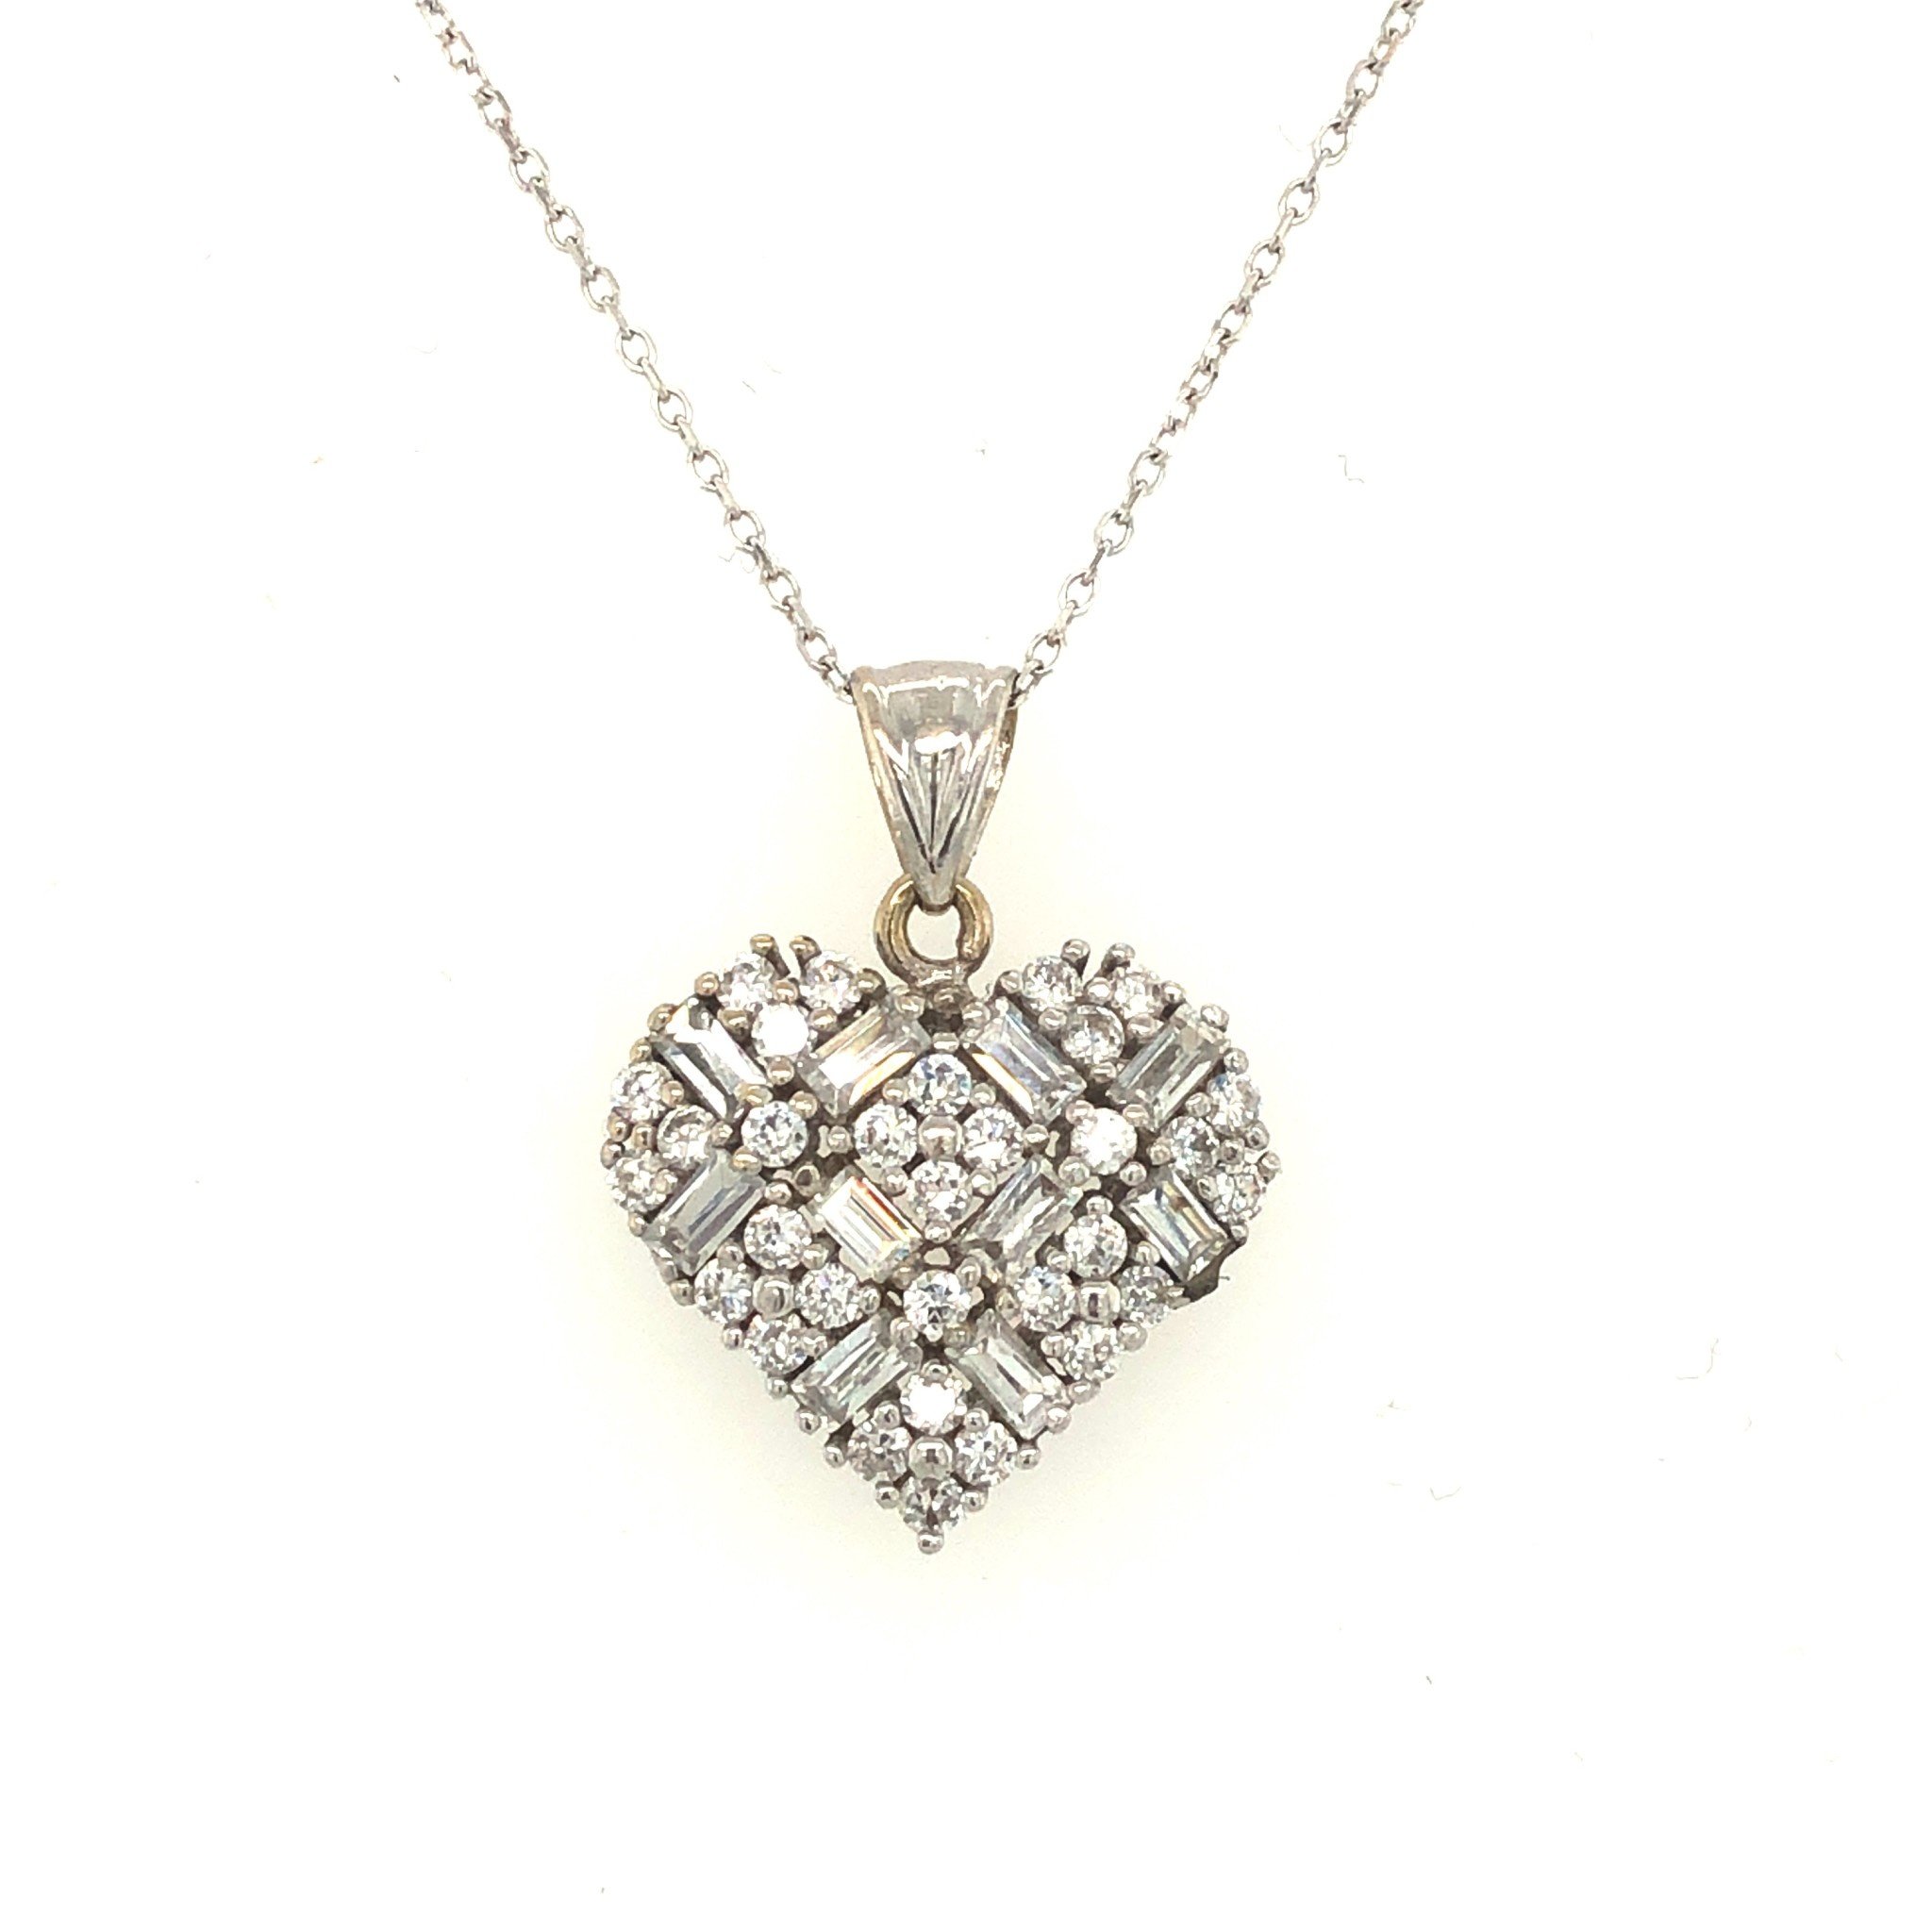 72793 14K WHITE GOLD ROUND AND BAGUETTE CUBIC ZIRCONIA CLUSTER HEART PENDANT SET